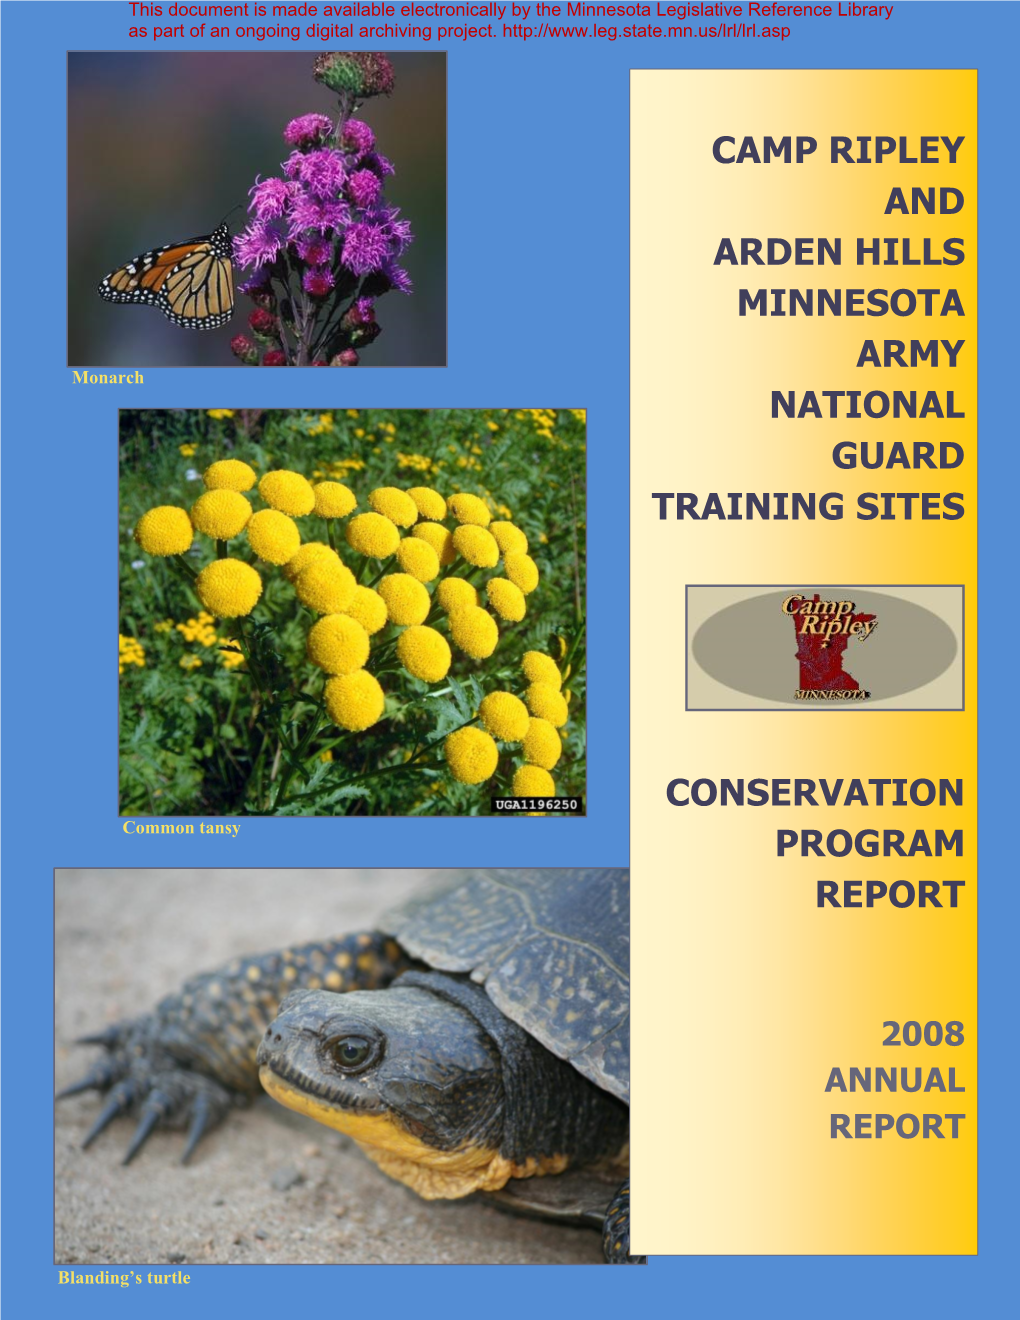 Camp Ripley and Arden Hills Minnesota Army National Guard Training Sites Conservation Program Report